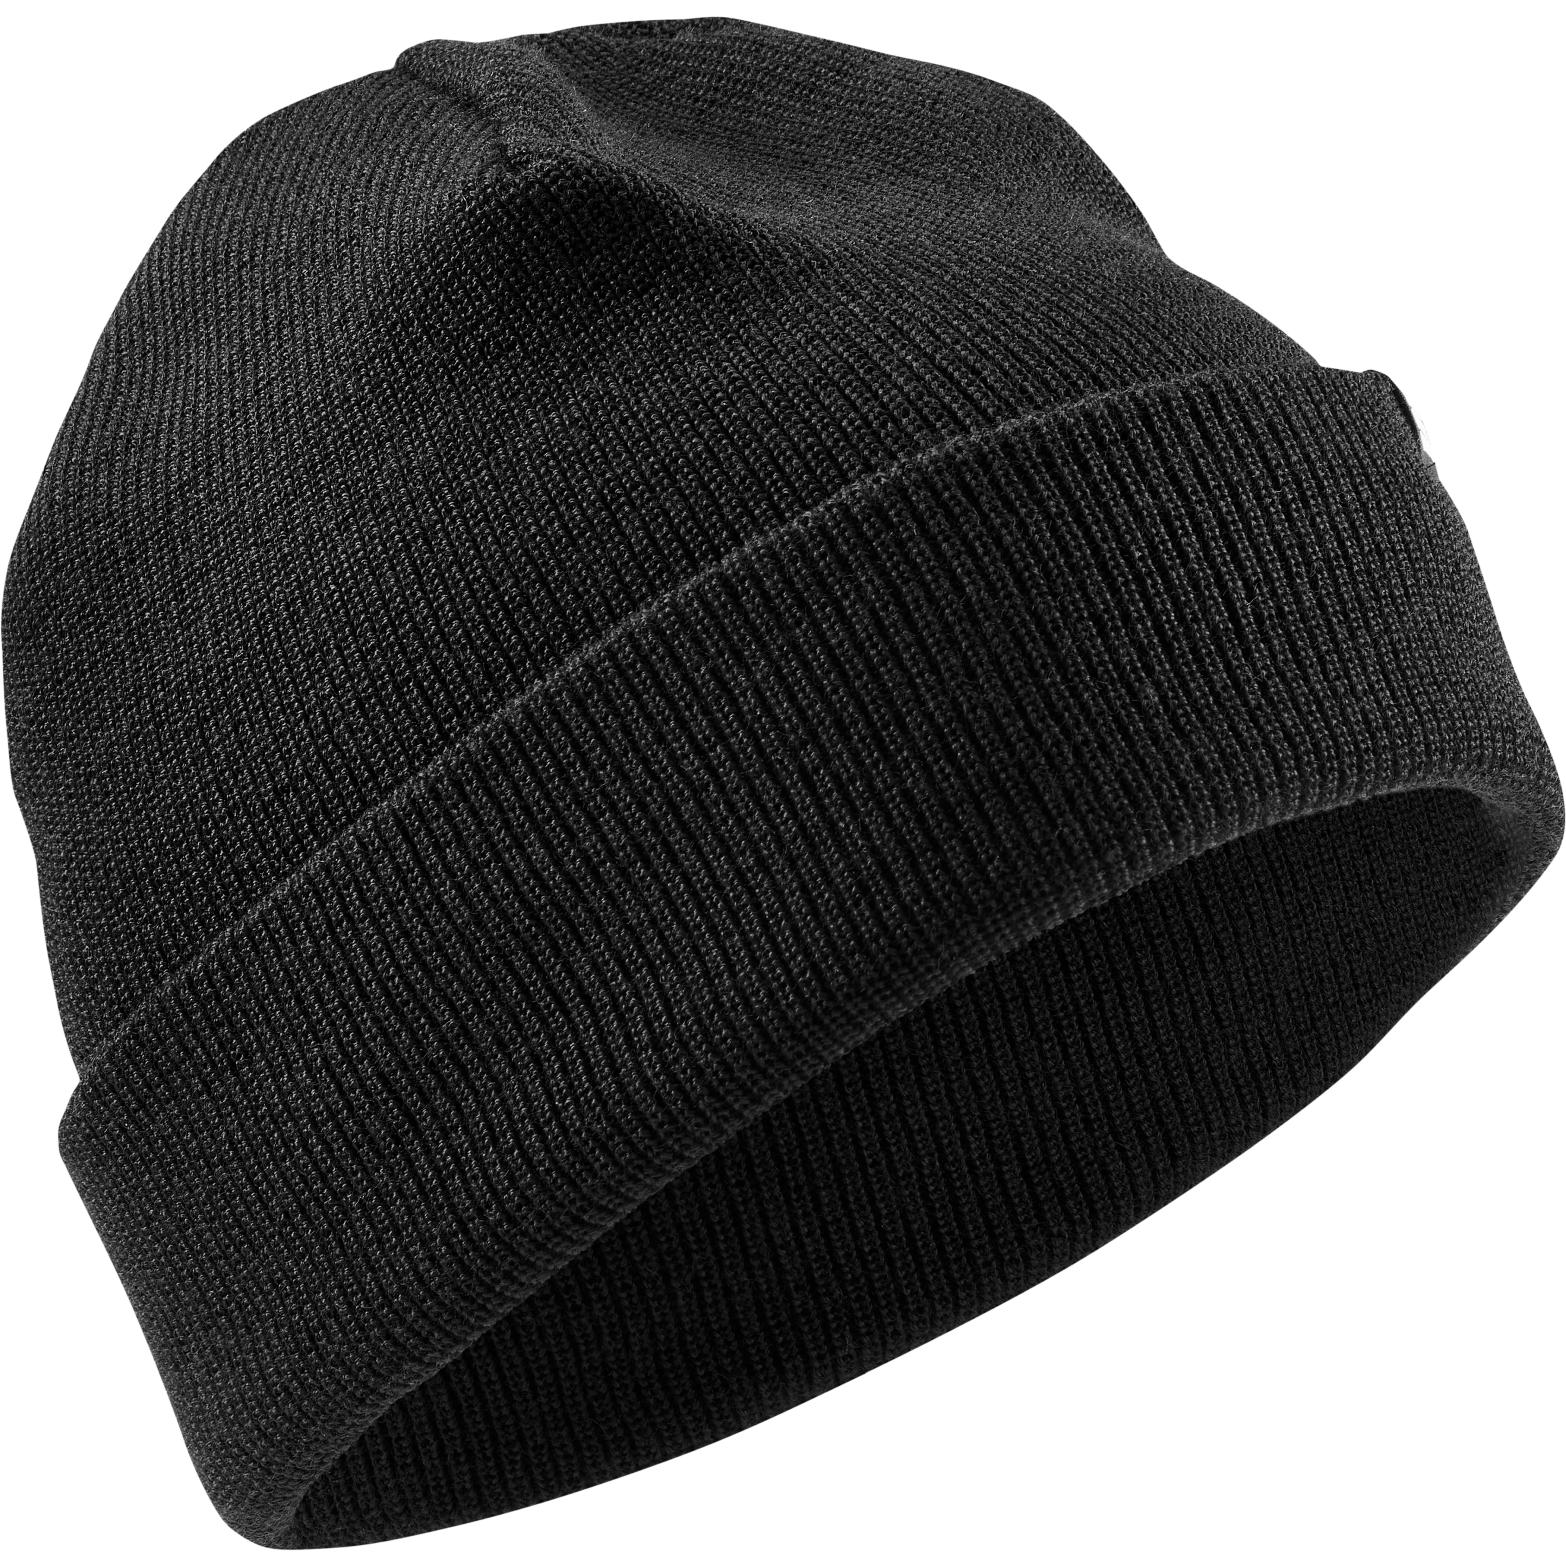 Picture of CEP Cold Weather Merino Beanie - black